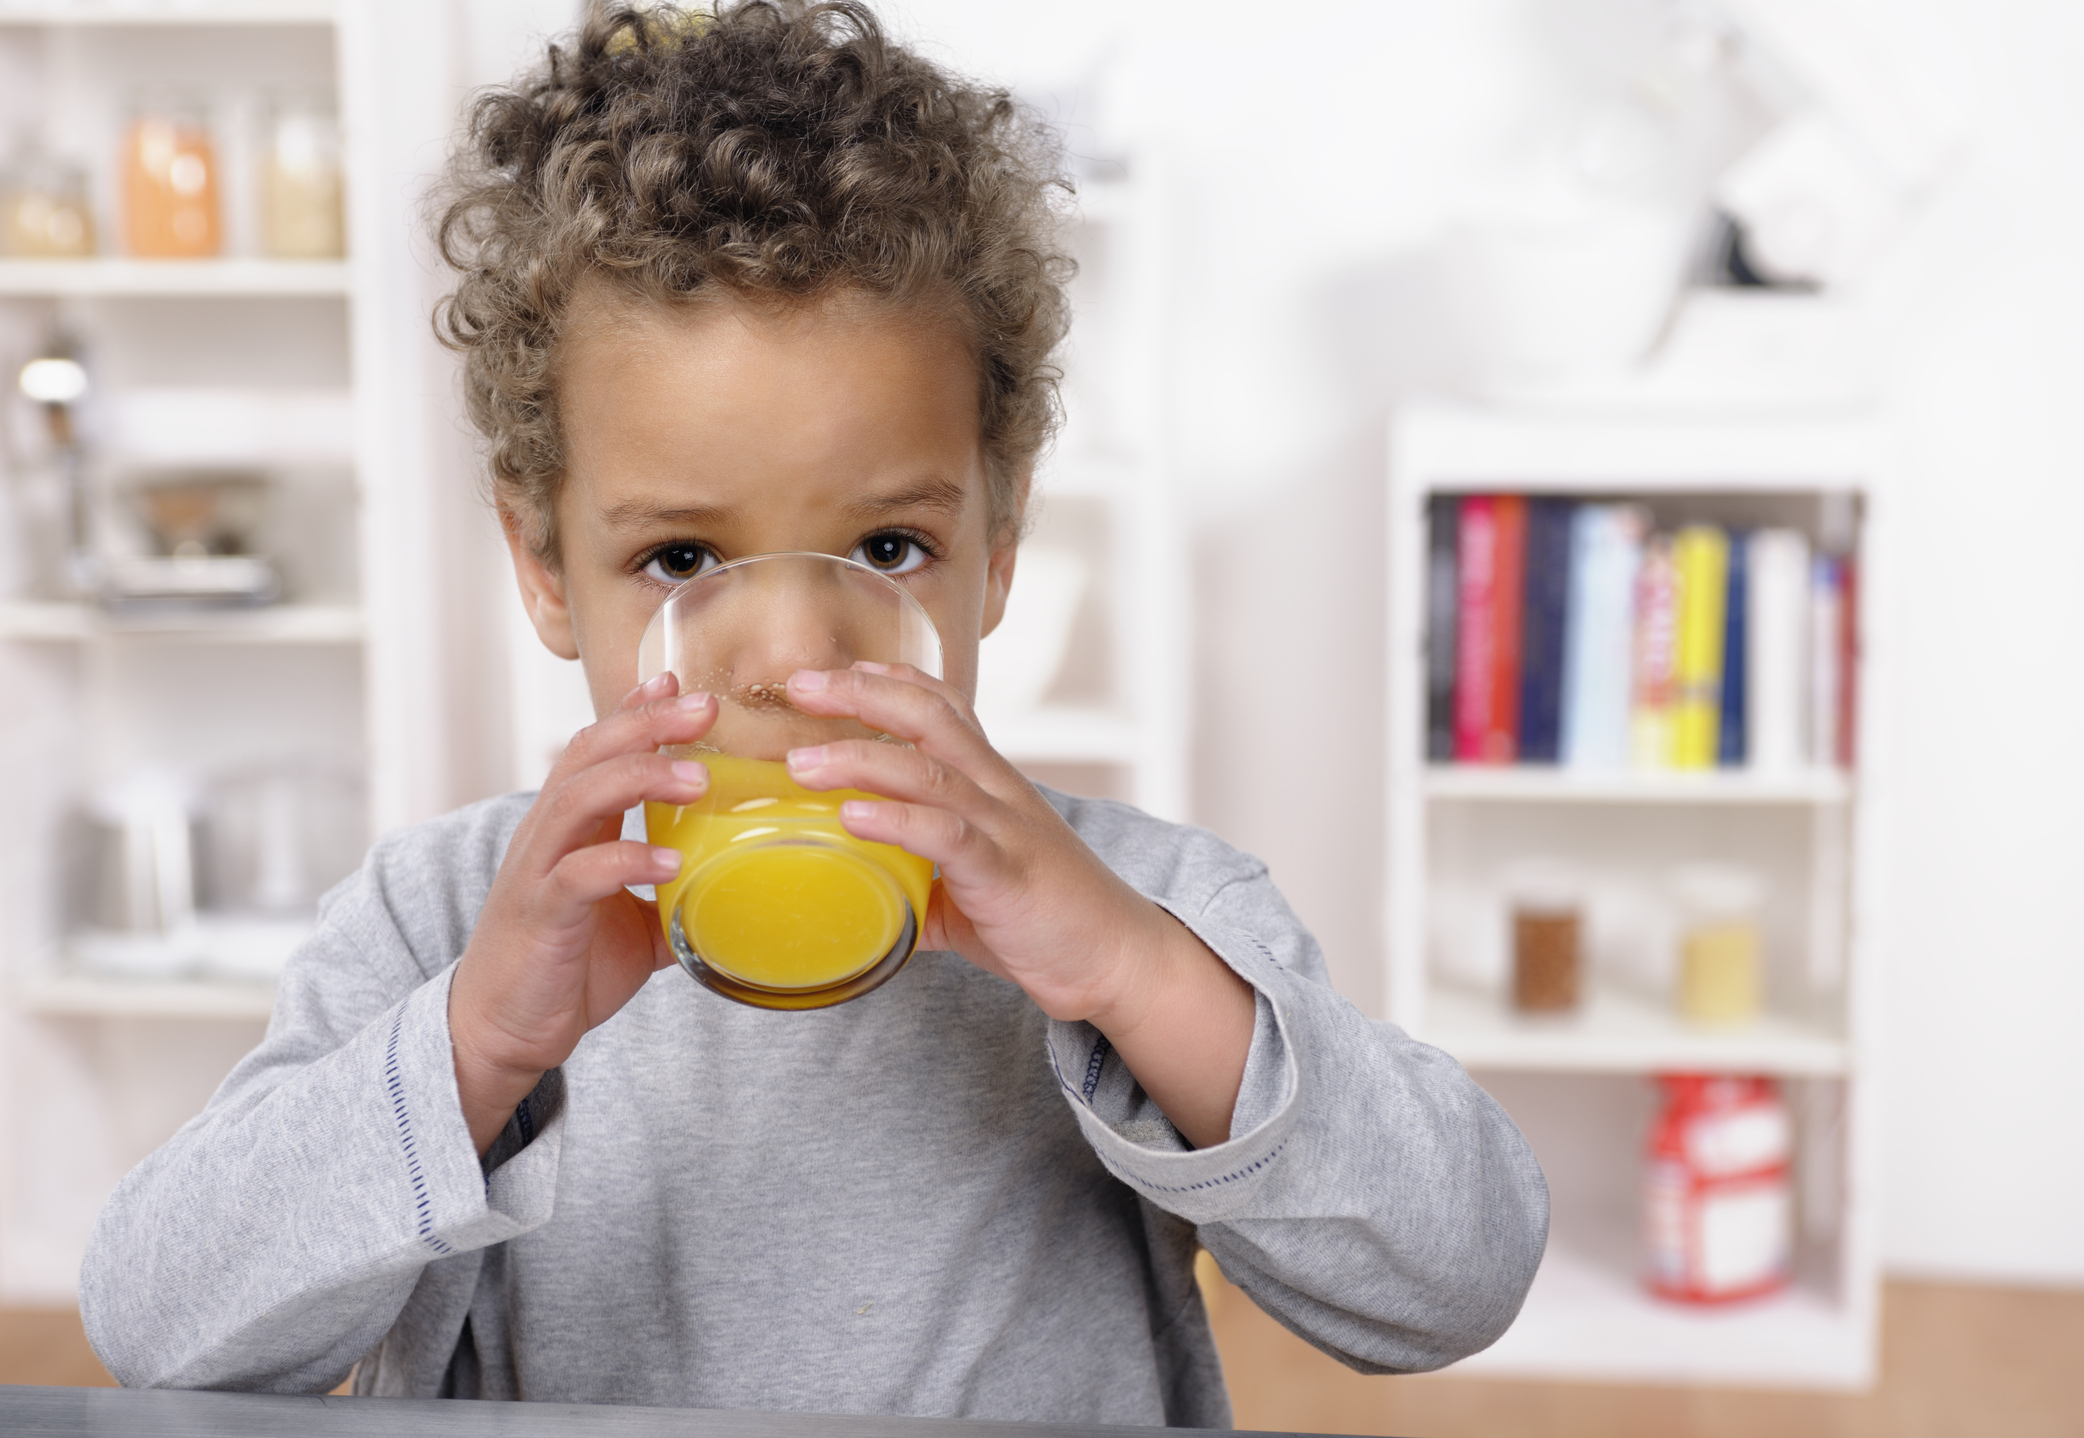 5 Reasons Why Juice for Kids Isn't as Healthy as You Think – Health ...